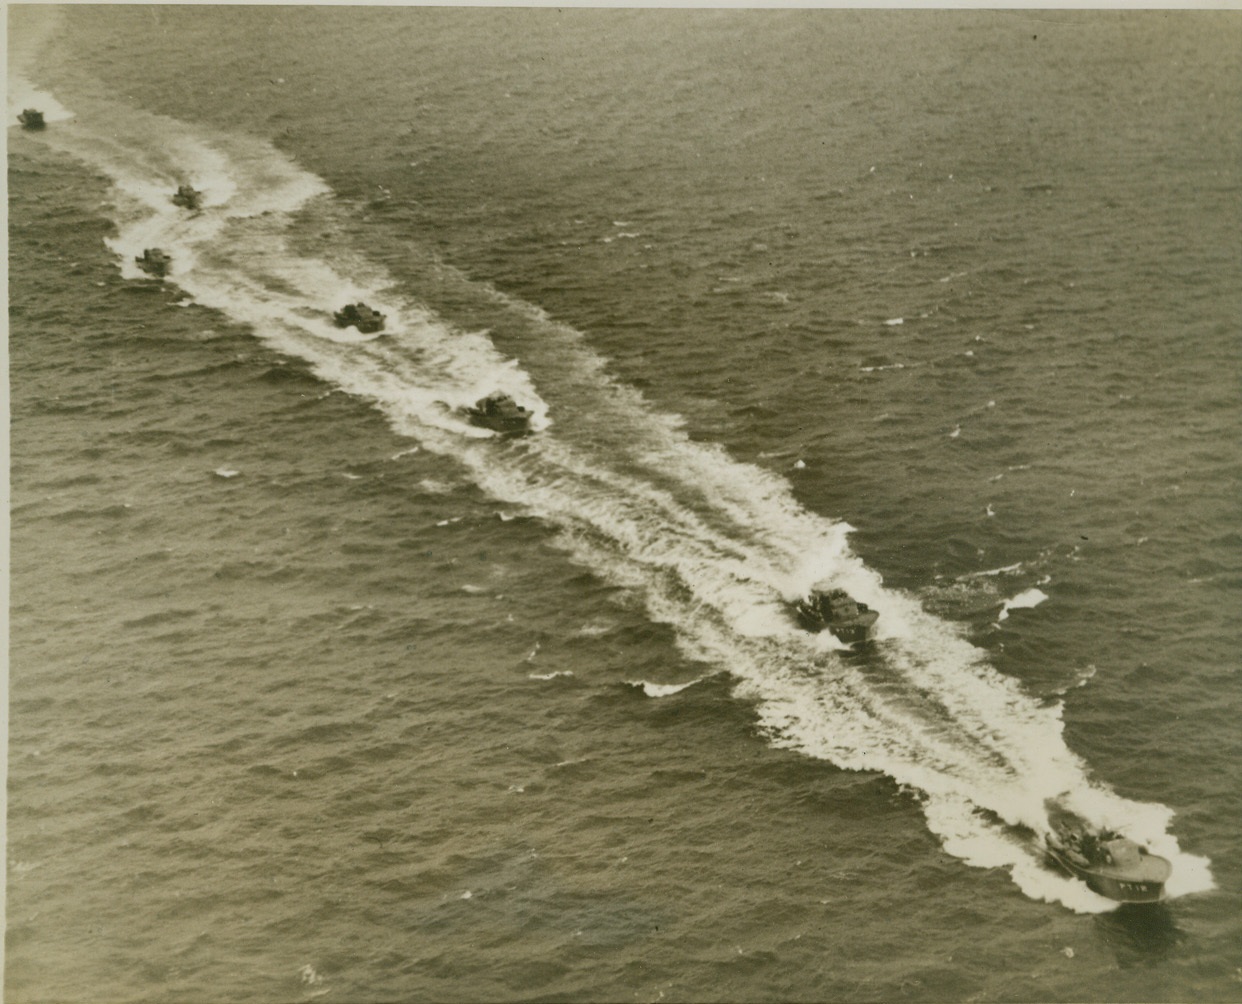 MOTOR TORPEDOBOAT FLOTILLA HEADS SOUTH, 1/13/41  NEW YORK CITY – An airview of the flotilla of eleven of the Navy’s motor torpedoboats, detailed for duty in southern waters “somewhere off Key West, Fla.,” as the deadly and swift little craft raise foaming wakes in the waters of Lower New York Bay with a fast start to their new stations. These craft, which can do over 70 miles per hour, are manned by 20 officers and 150 men, specially selected for the assignment. The flotilla is commanded by Lieutenant Commander Earl S. Caldwell. Credit: OWI Radiophoto from ACME;